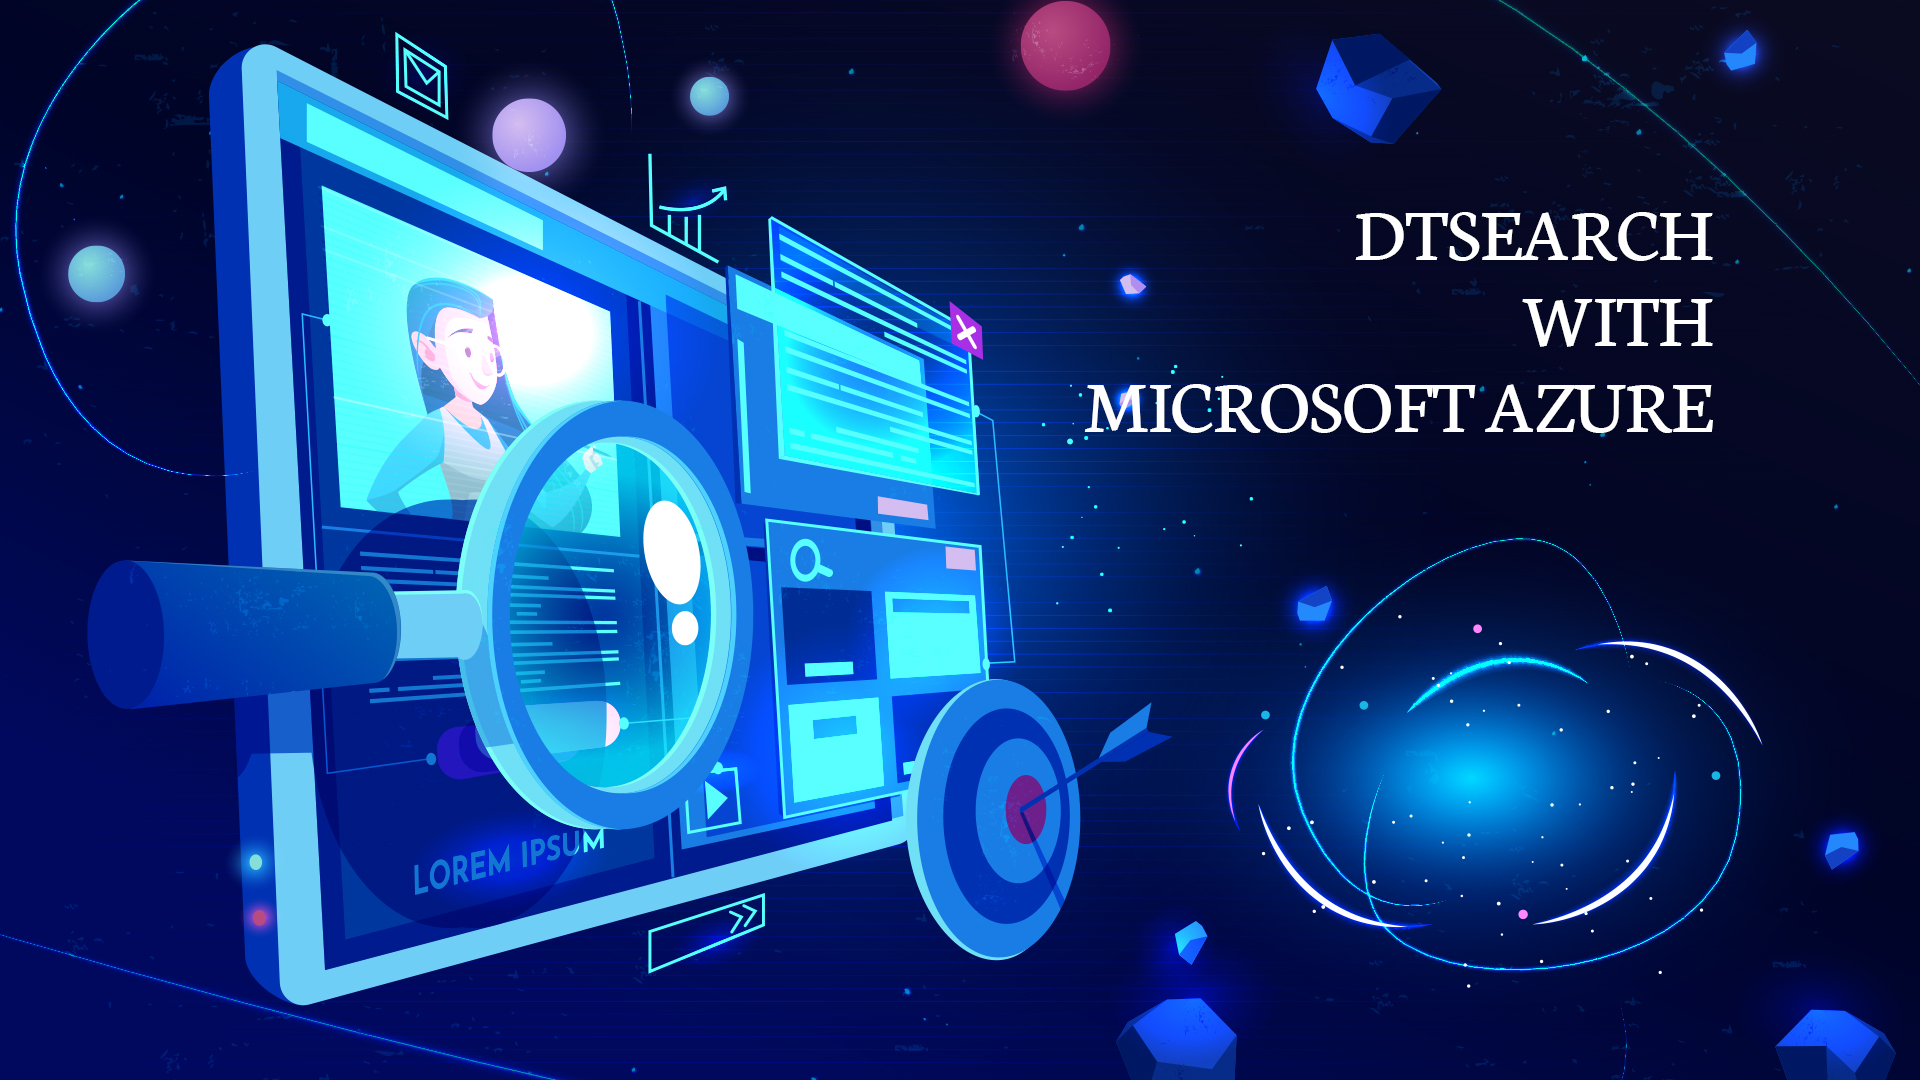 DtSearch with Microsoft Azure files Used by Dot Net Solutions